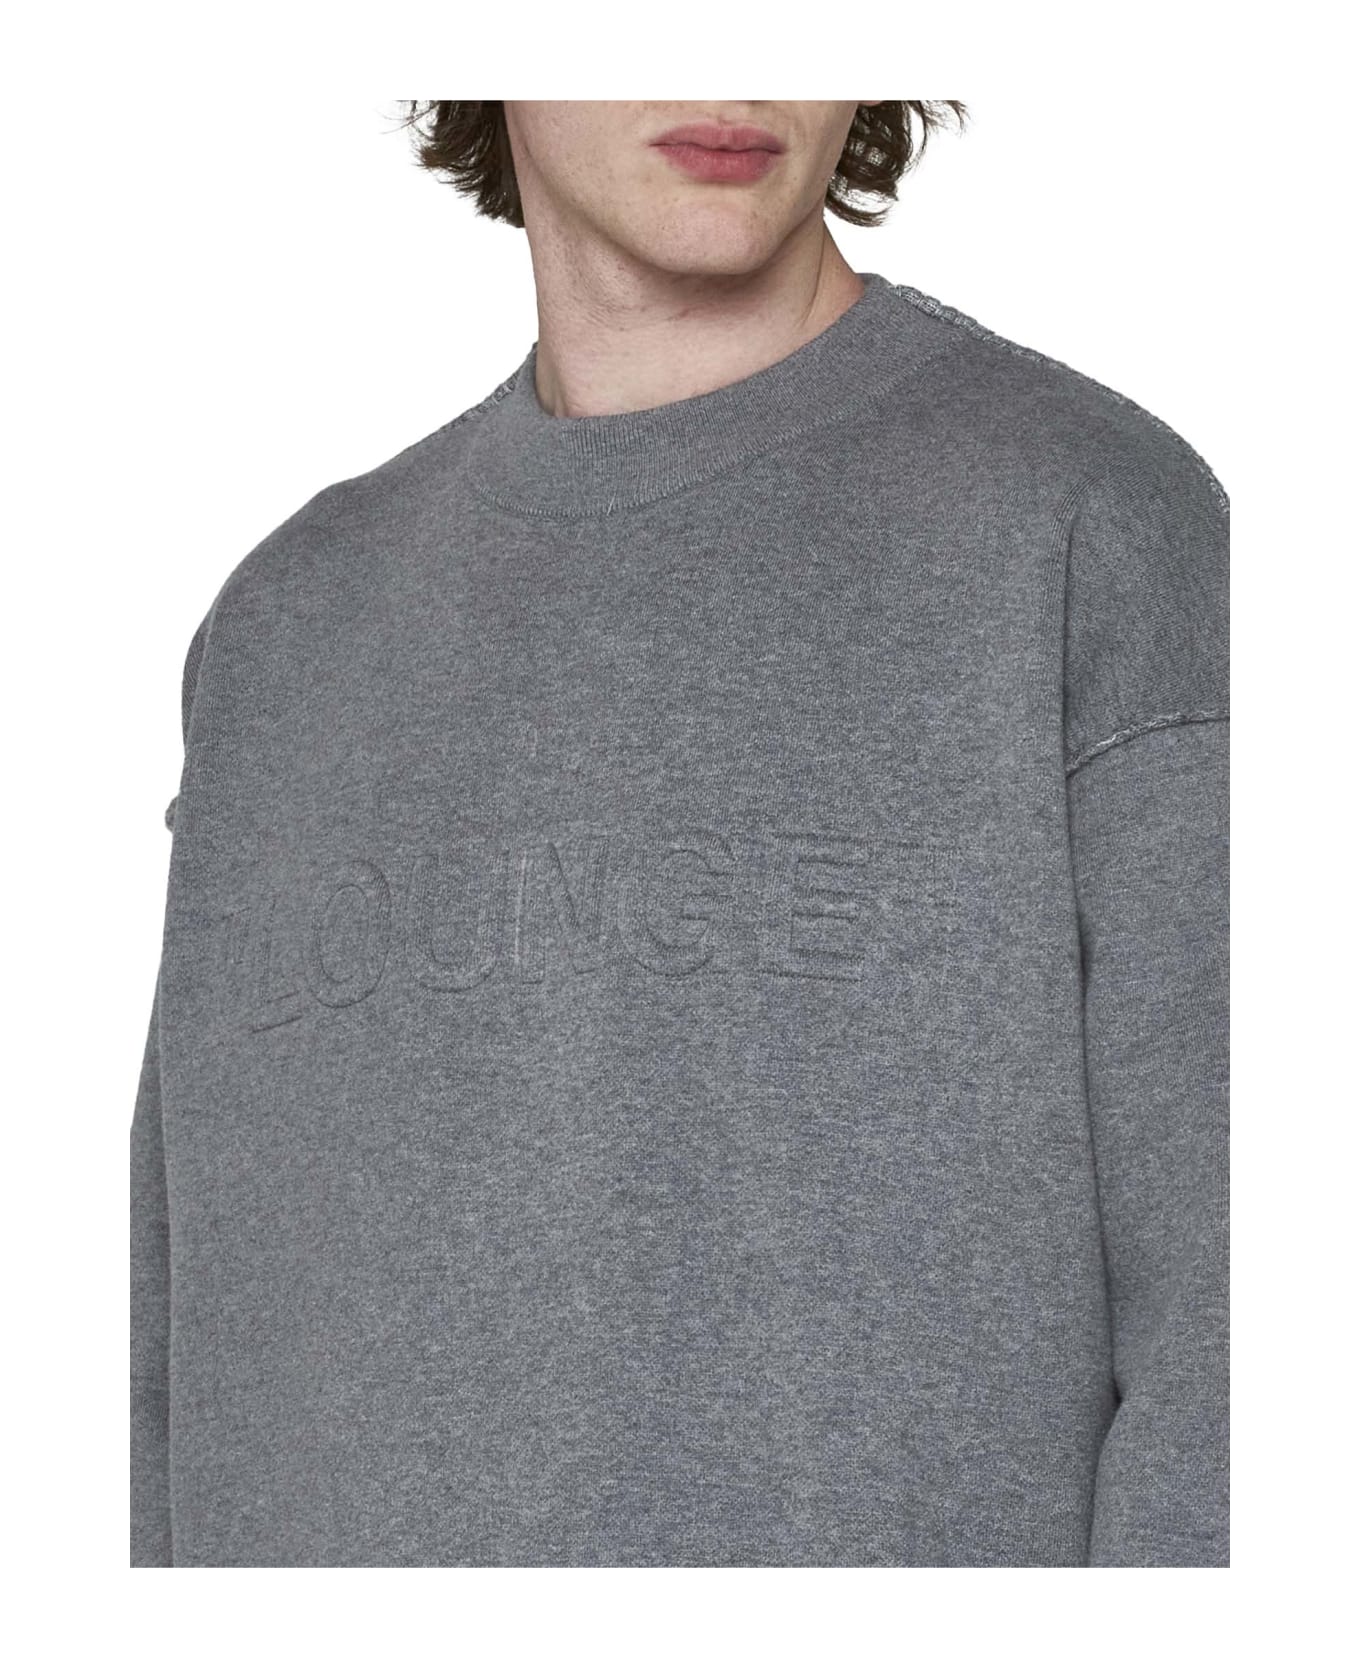 Off-White Knit Cotton Blend Pullover - grey